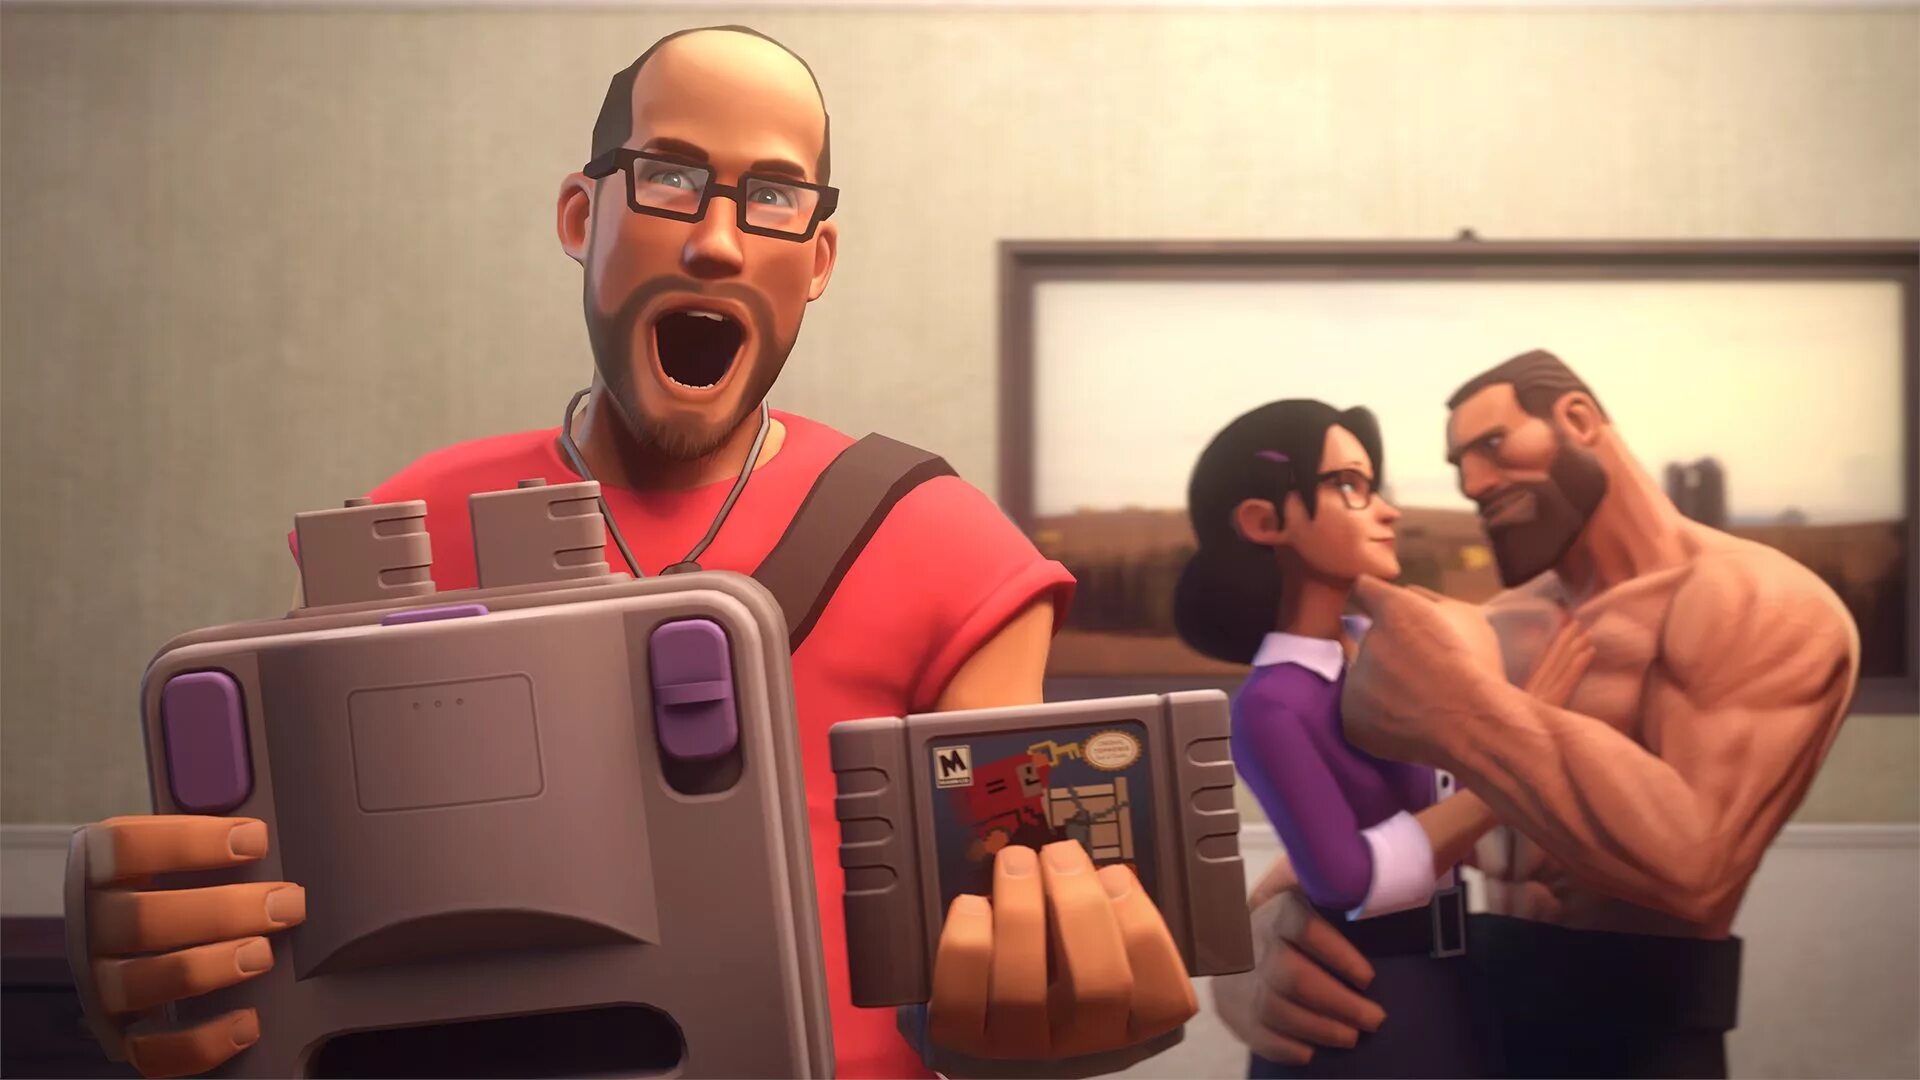 Hey over. Team Fortress 2. Tf2 Cursed screenshots. Team Fortress 2 Cursed images. Scout tf2.